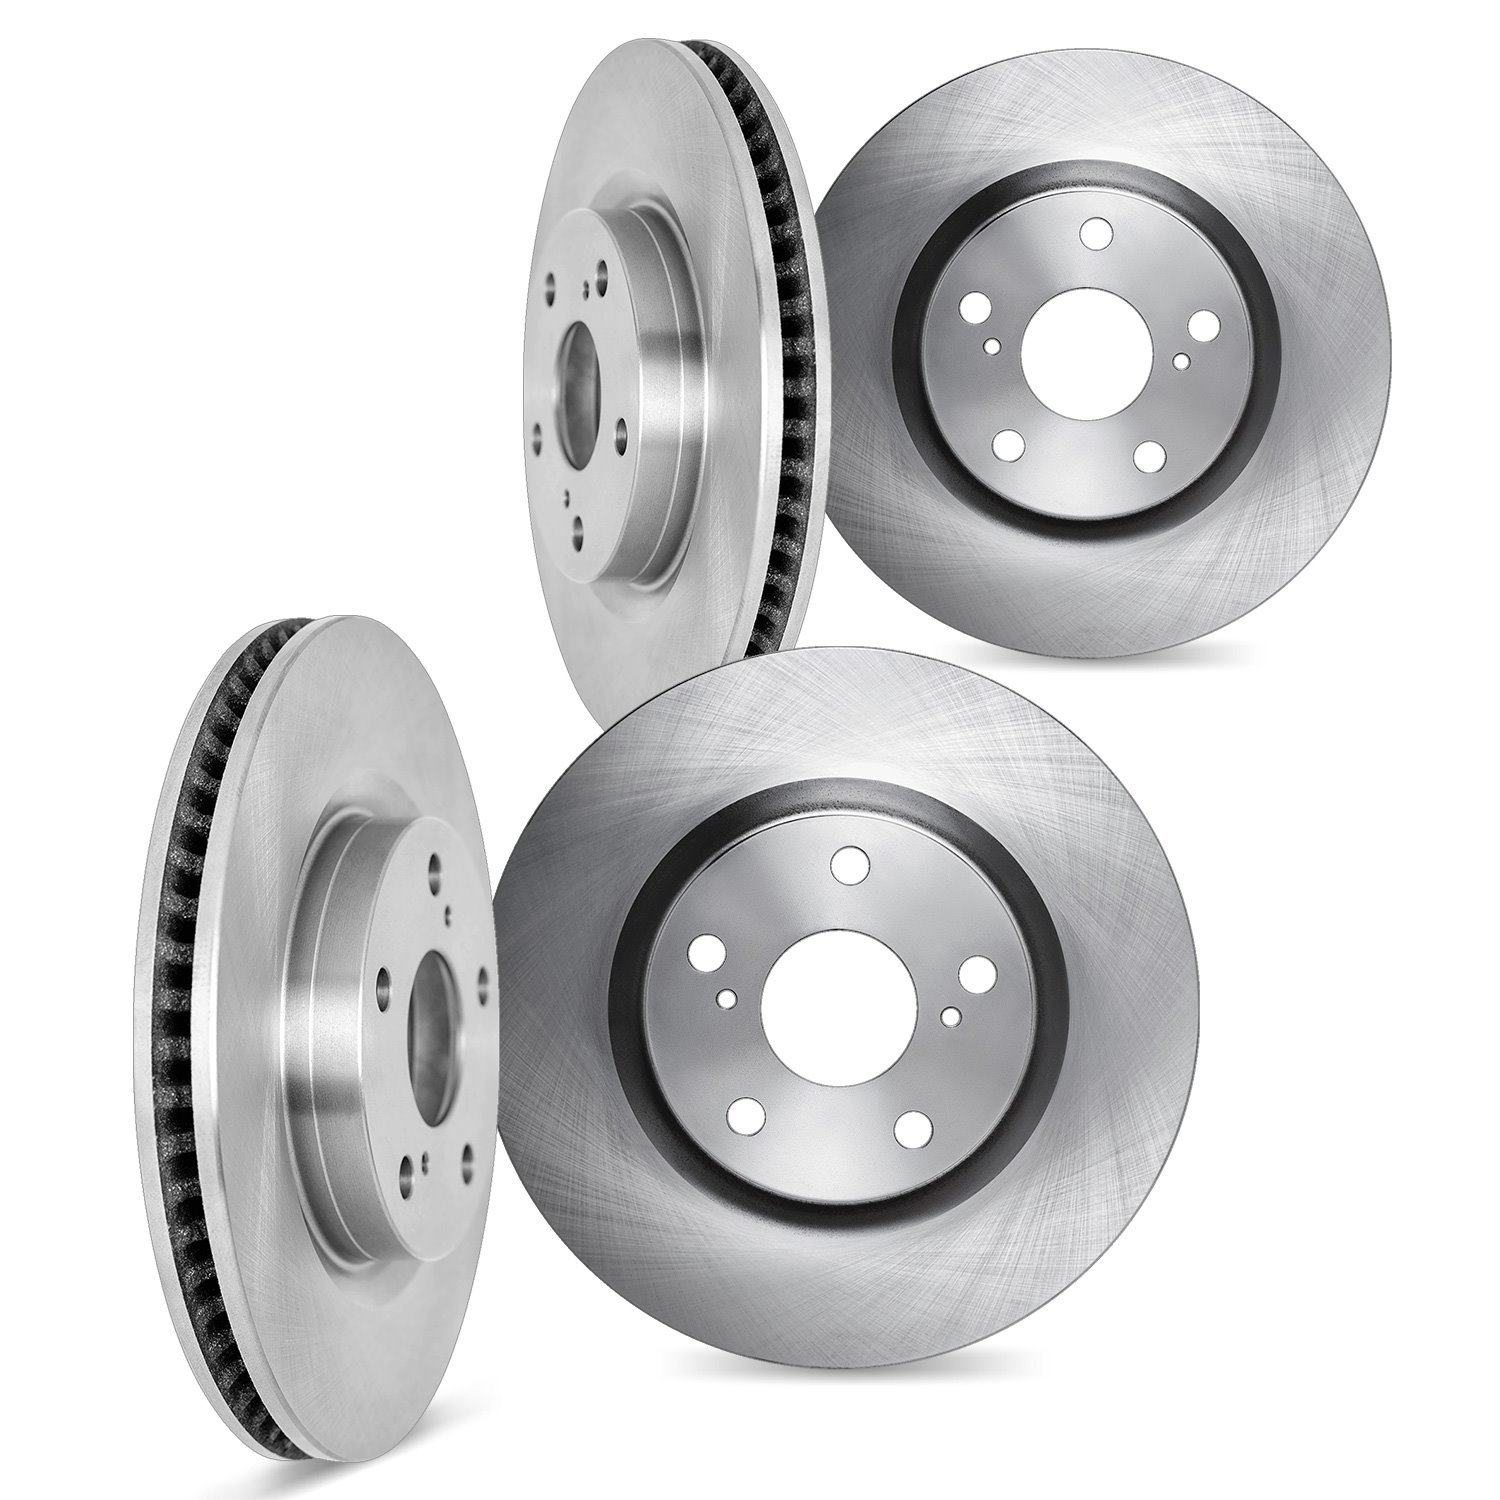 6004-67127 Brake Rotors, Fits Select Multiple Makes/Models, Position: Front and Rear